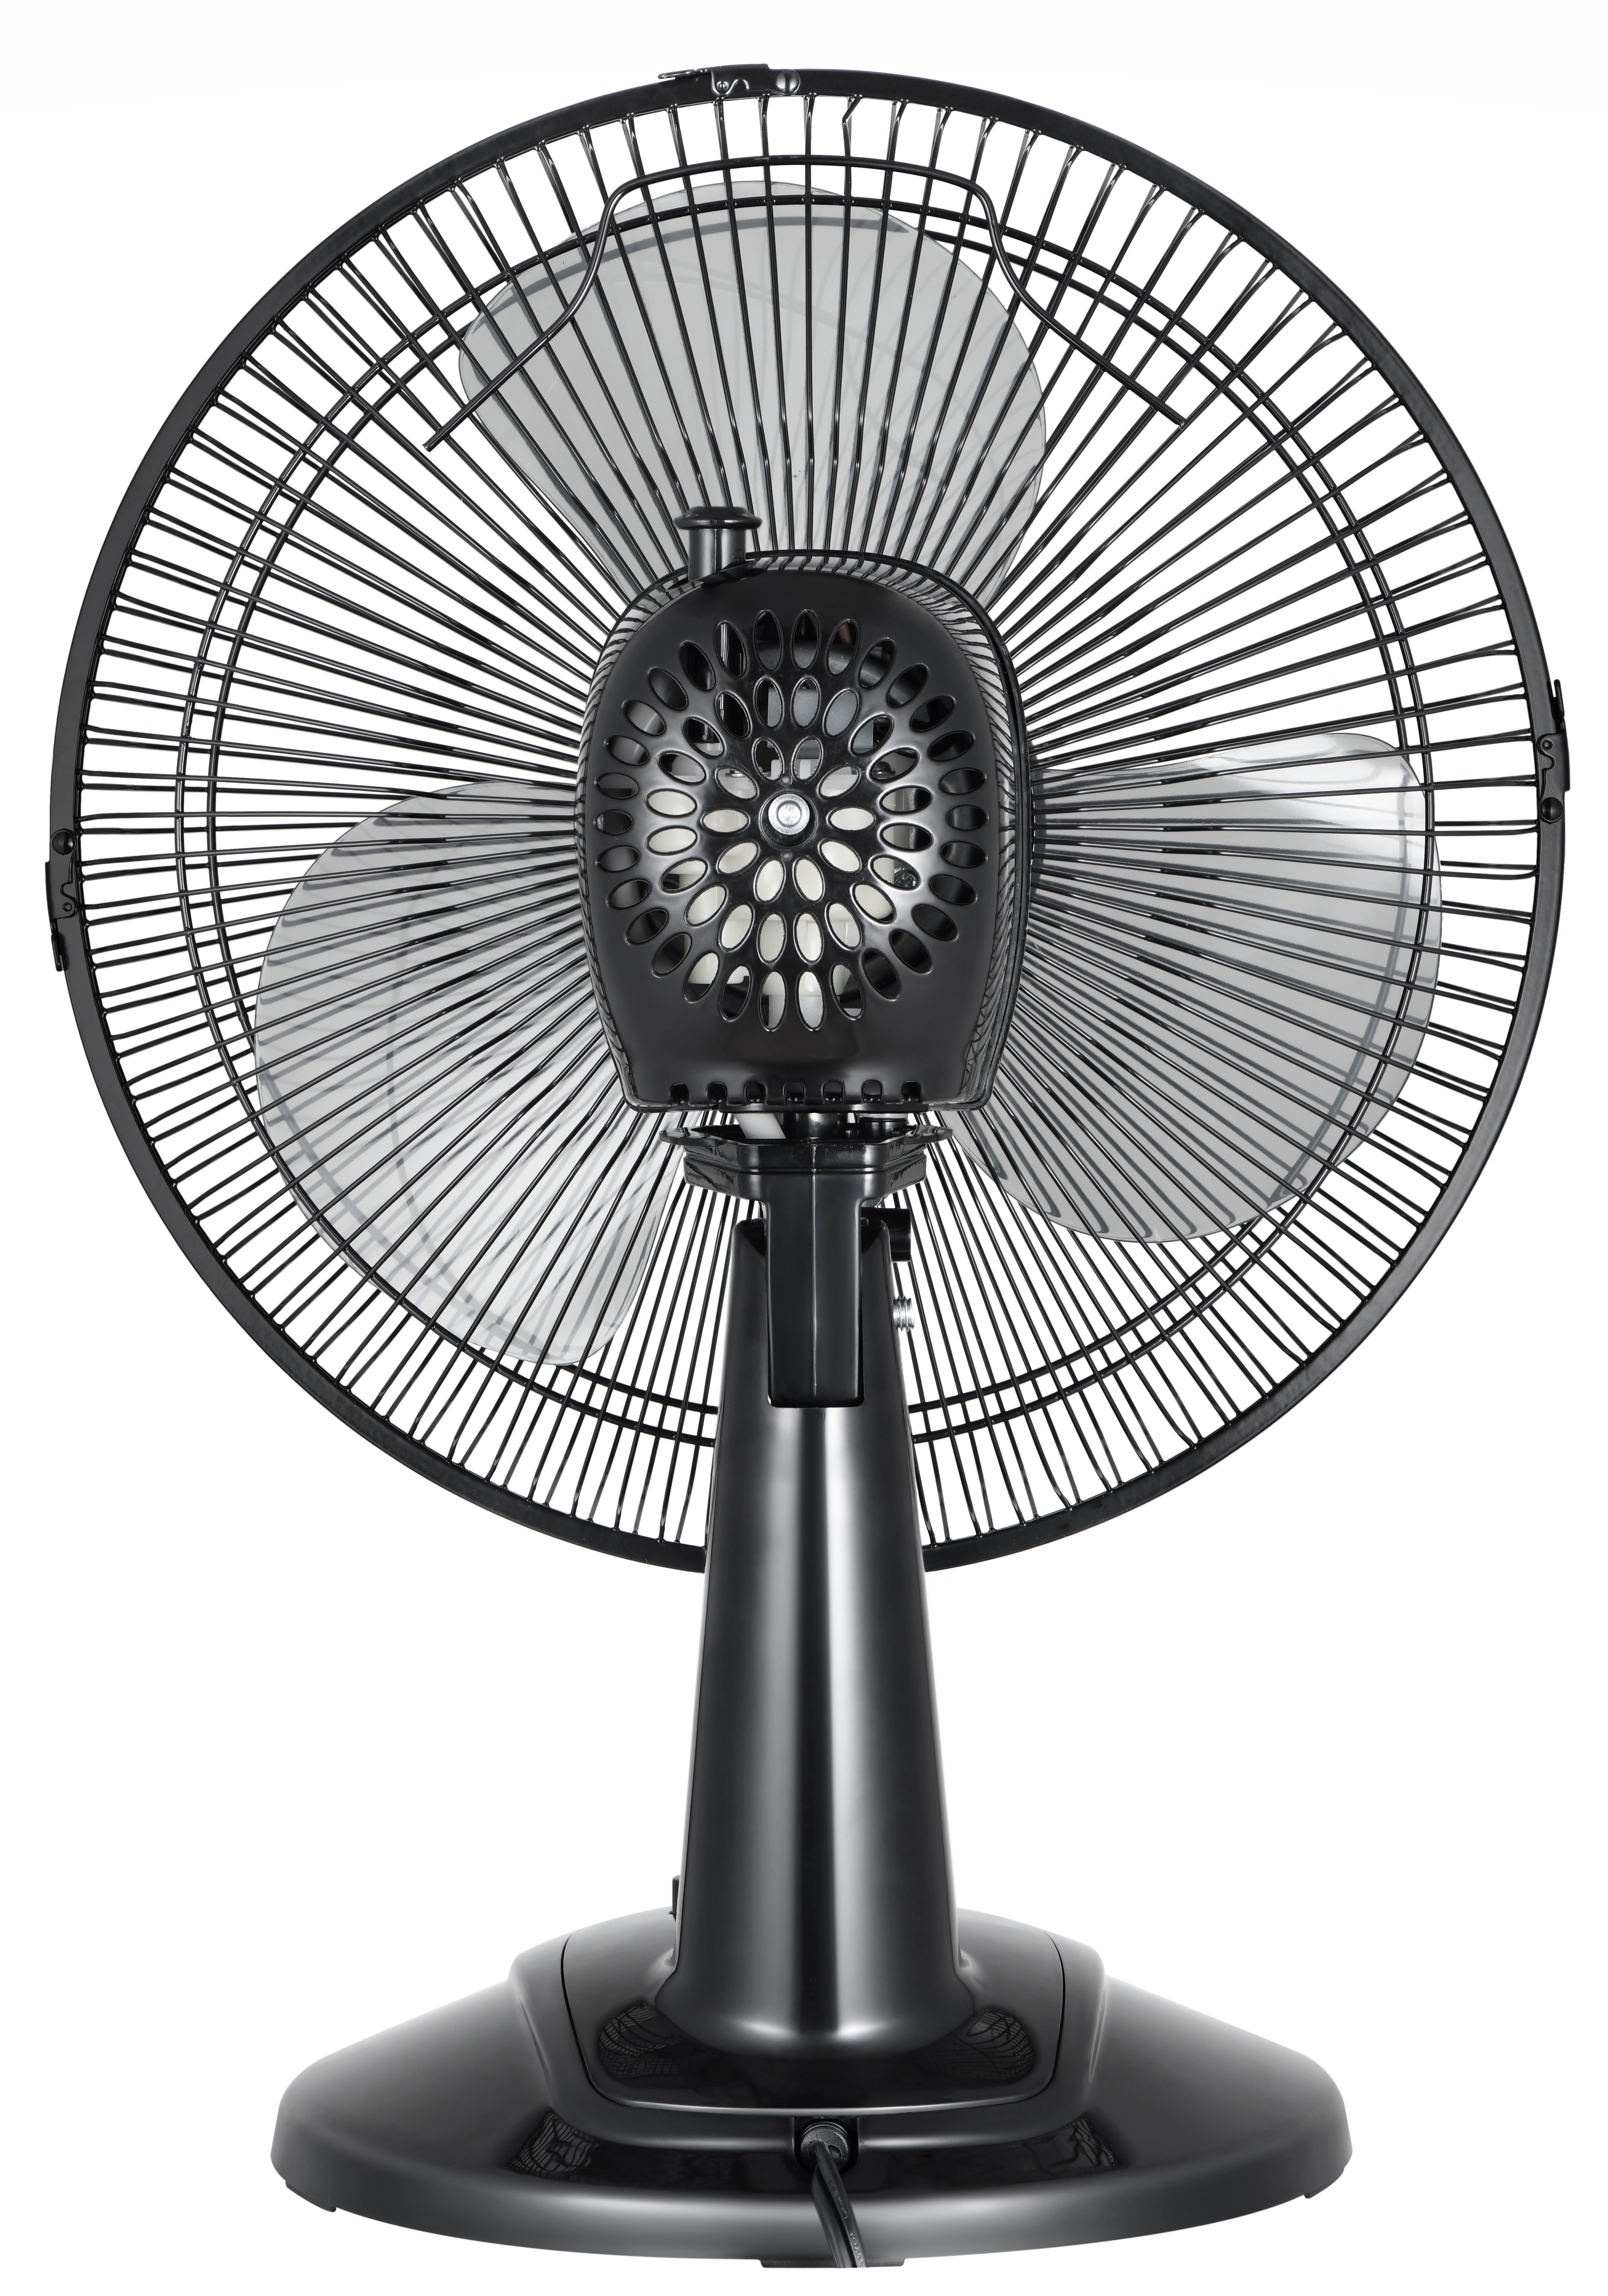 Mainstays 12" 3-Speed Oscillating Table Fan, FT30-8MBB, New, Black - image 5 of 9